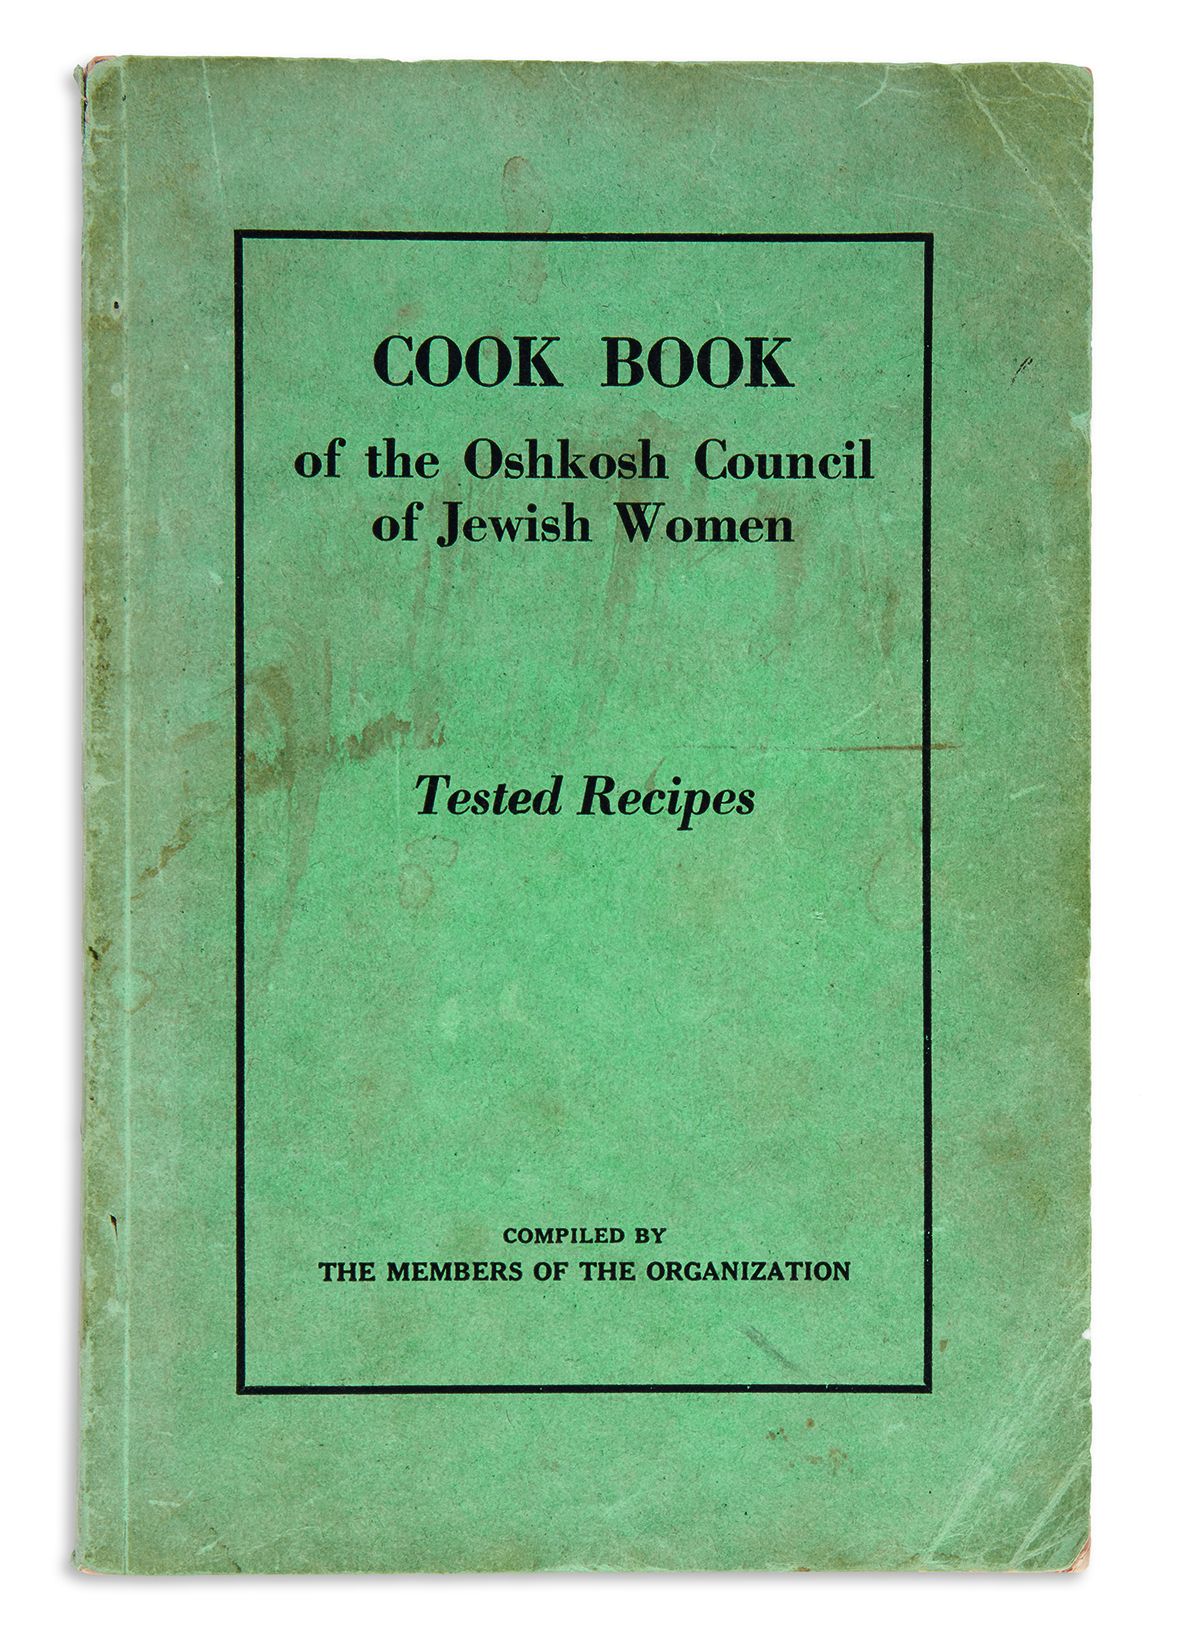 Cook Books of the Oshkosh Council of Jewish Women. Tested Recipes